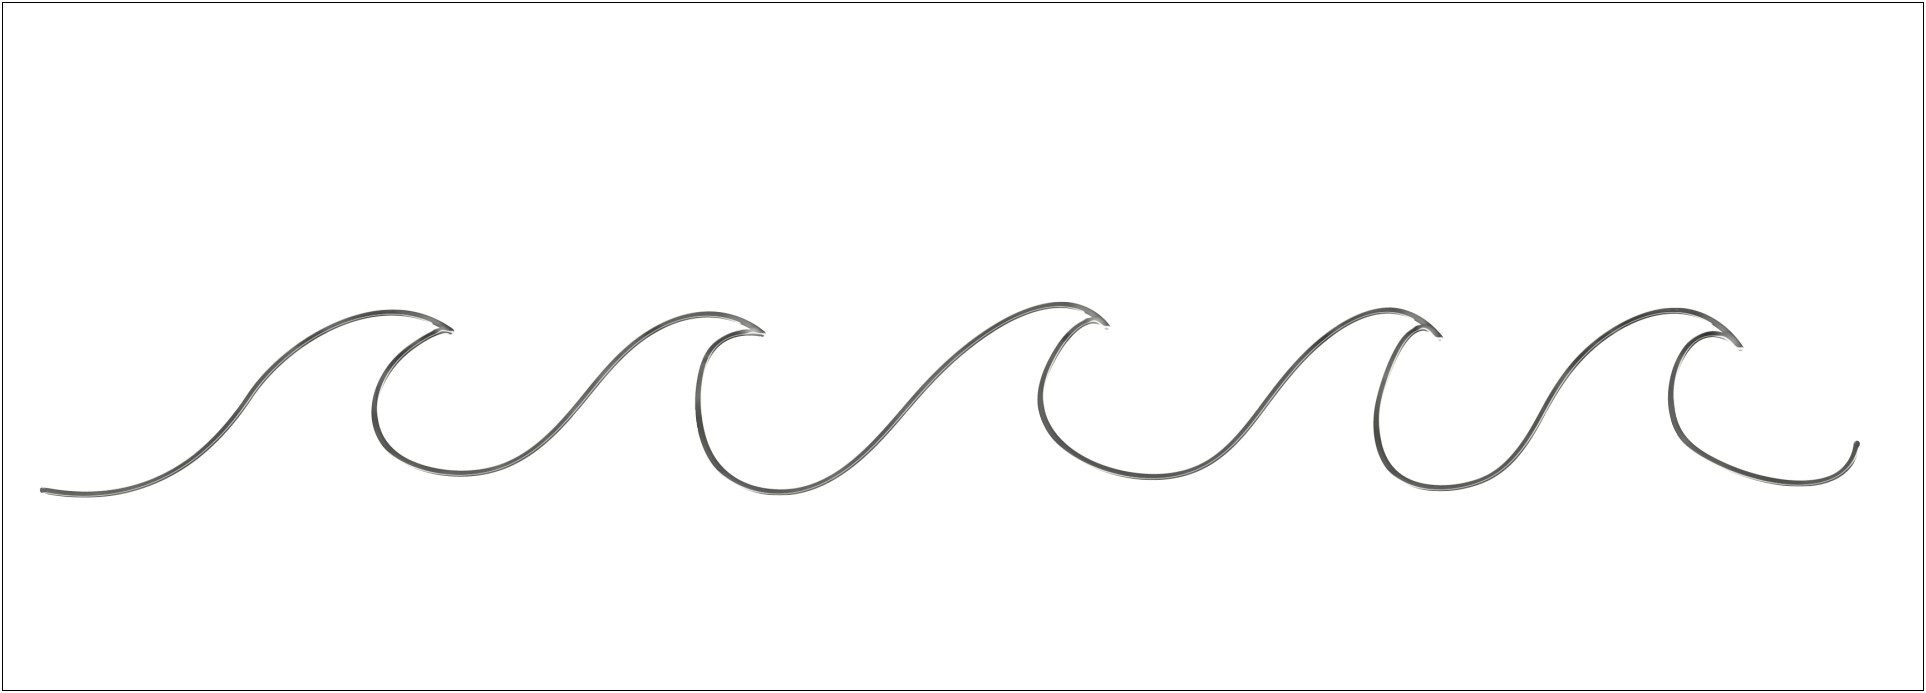 Free Black And White Cartoon Ocean Wave Template